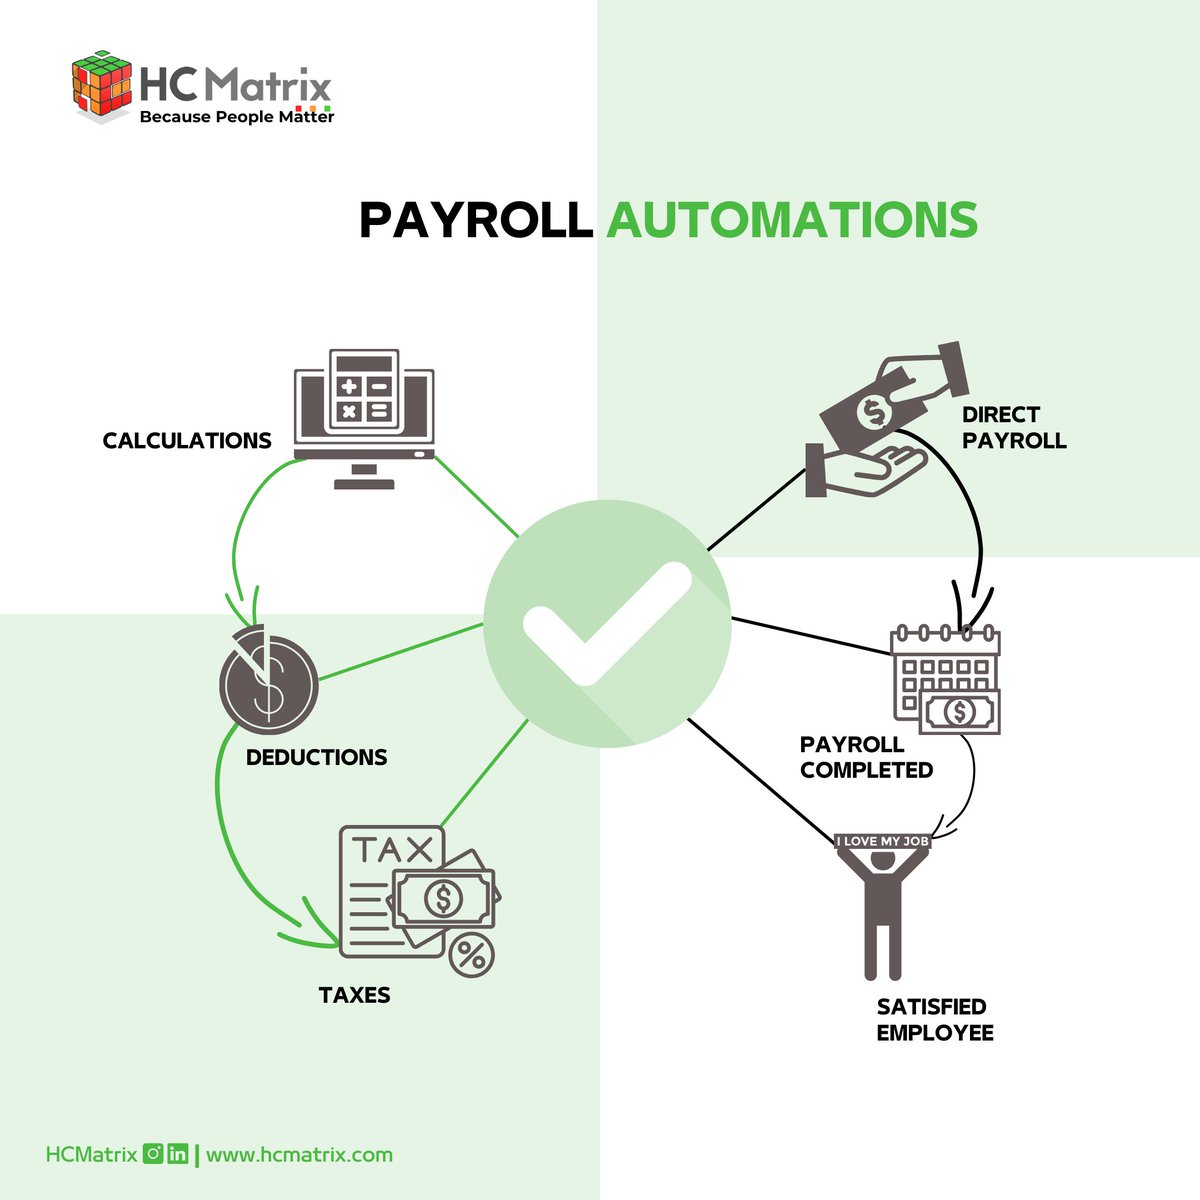 Manual payroll processing is time-consuming, prone to errors, and a source of frustration for HR professionals.

Goodbye to Payroll Headaches!​

Enjoy an effortless, accurate, and automated payroll with HCMatrix​.

Click the link on our bio to get started.

#Hcmatrix #CFO #HR